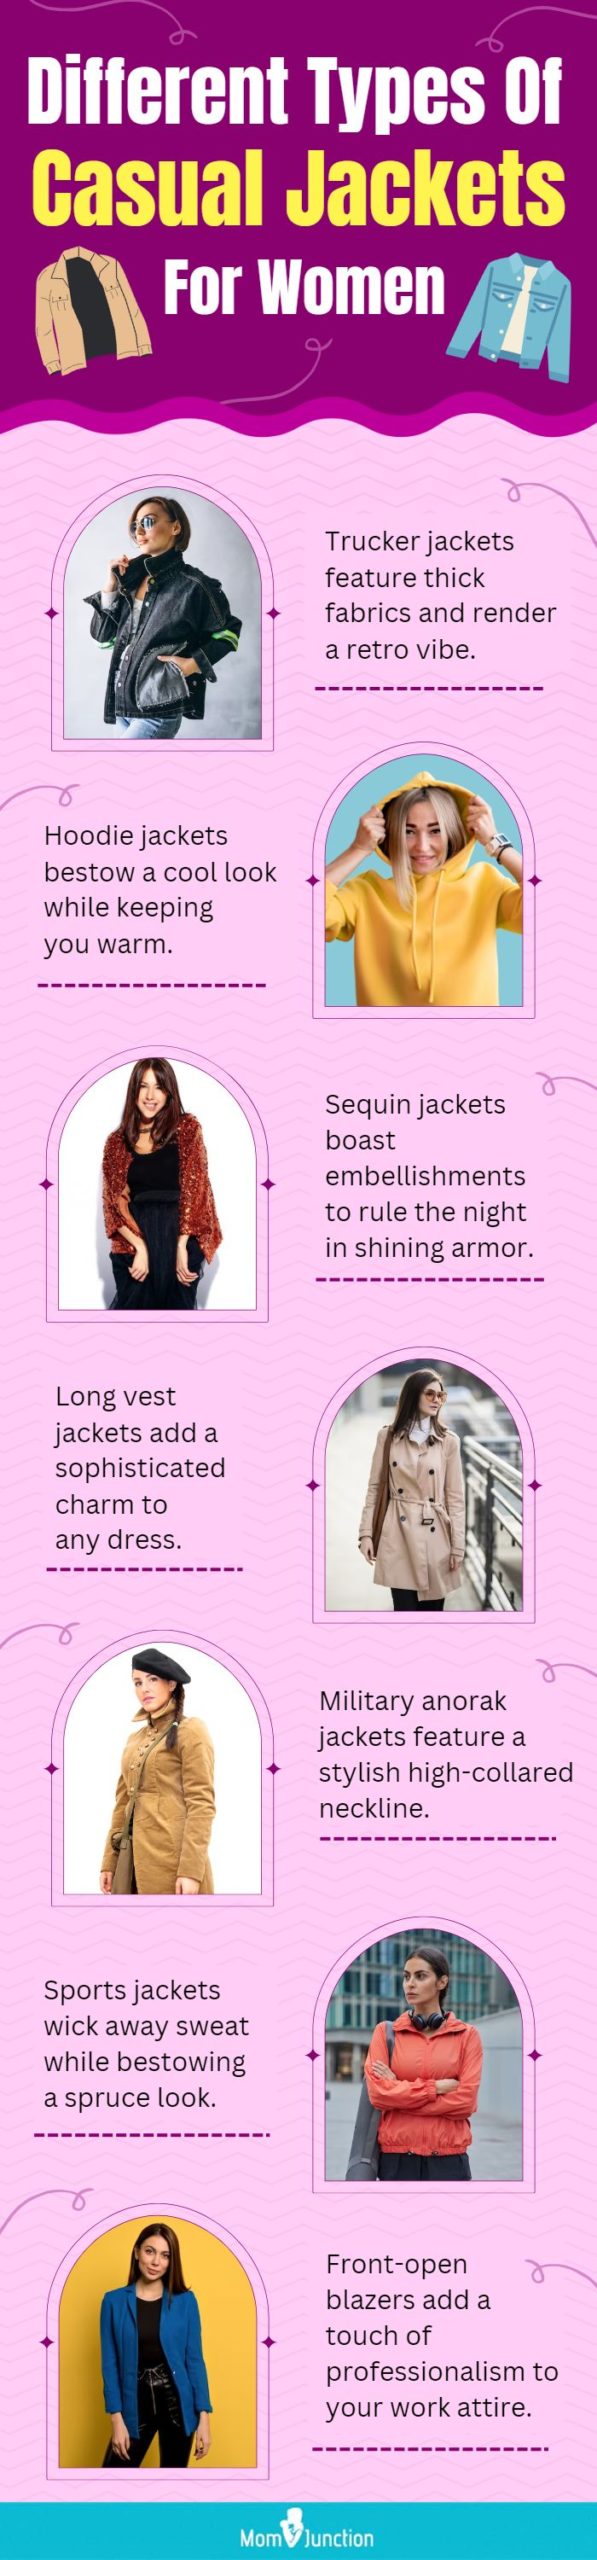 Different Types Of Casual Jackets For Women (infographic)